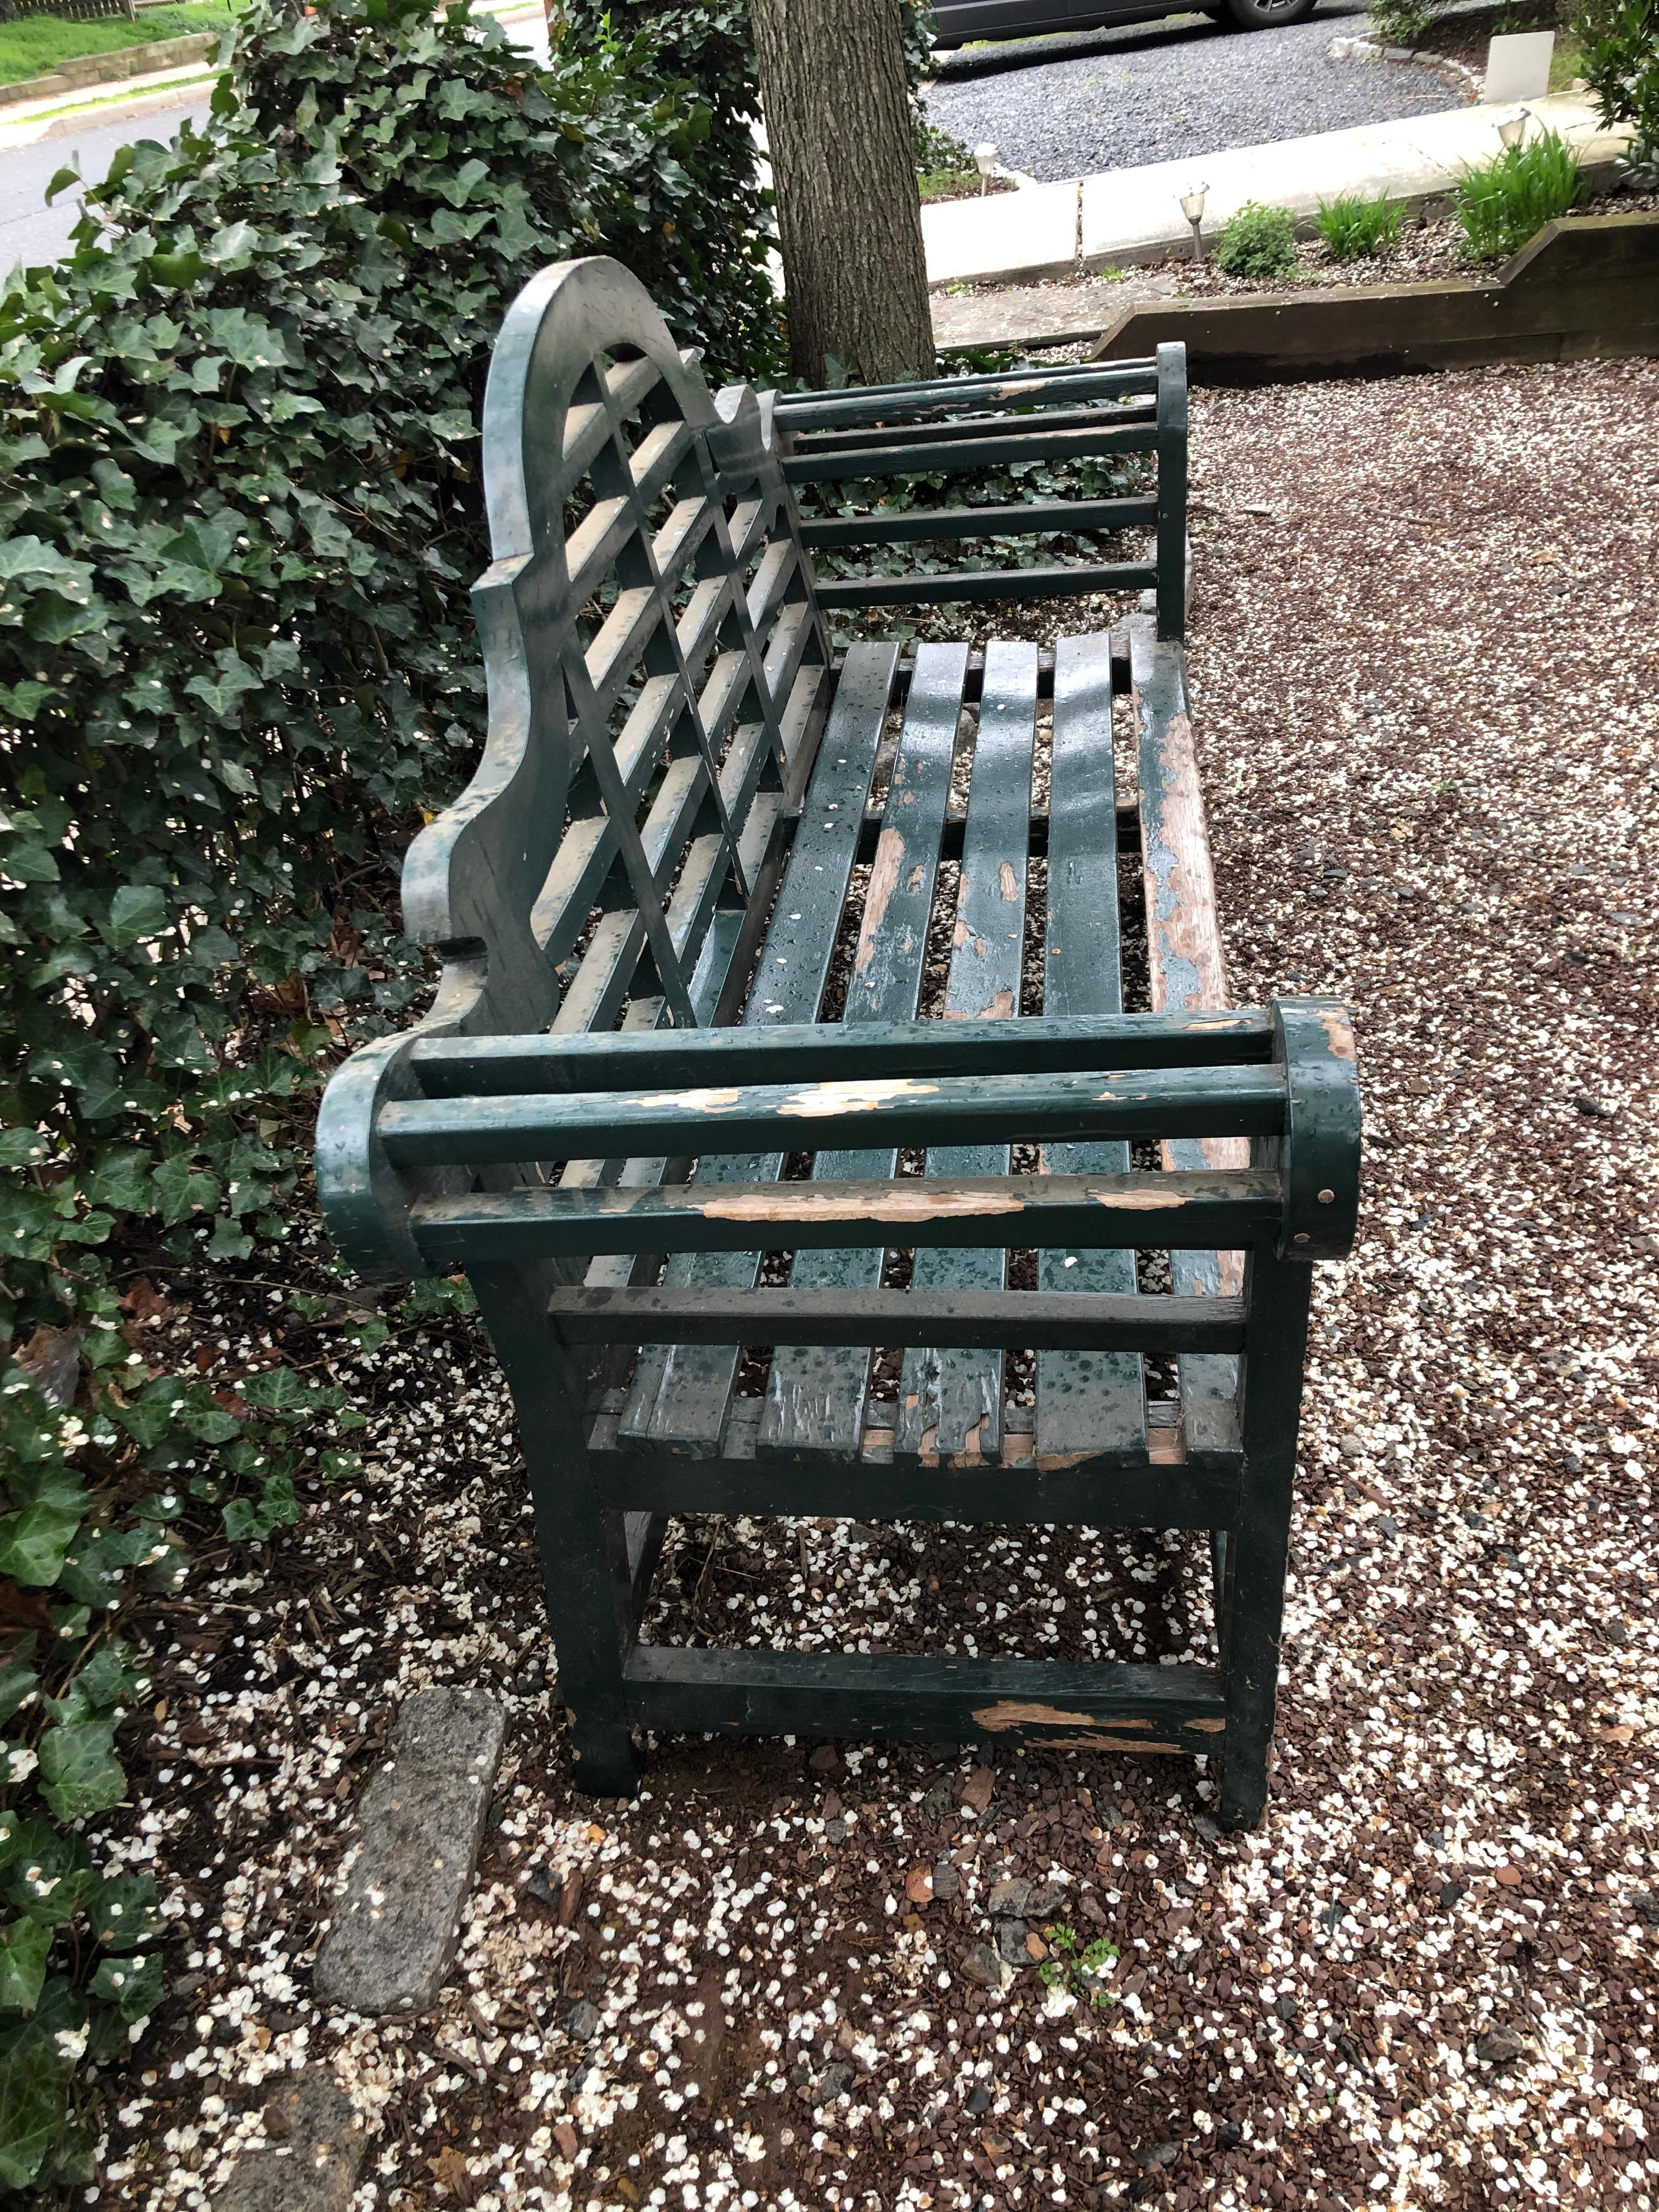 A classical Edwardian style teak bench, originally designed by the famous English architect Sir Edwin Lutyens in the early 1900s. Big, with heavy solid construction, in very sturdy condition, with chippy dark green paint. Great bones, but worthy of